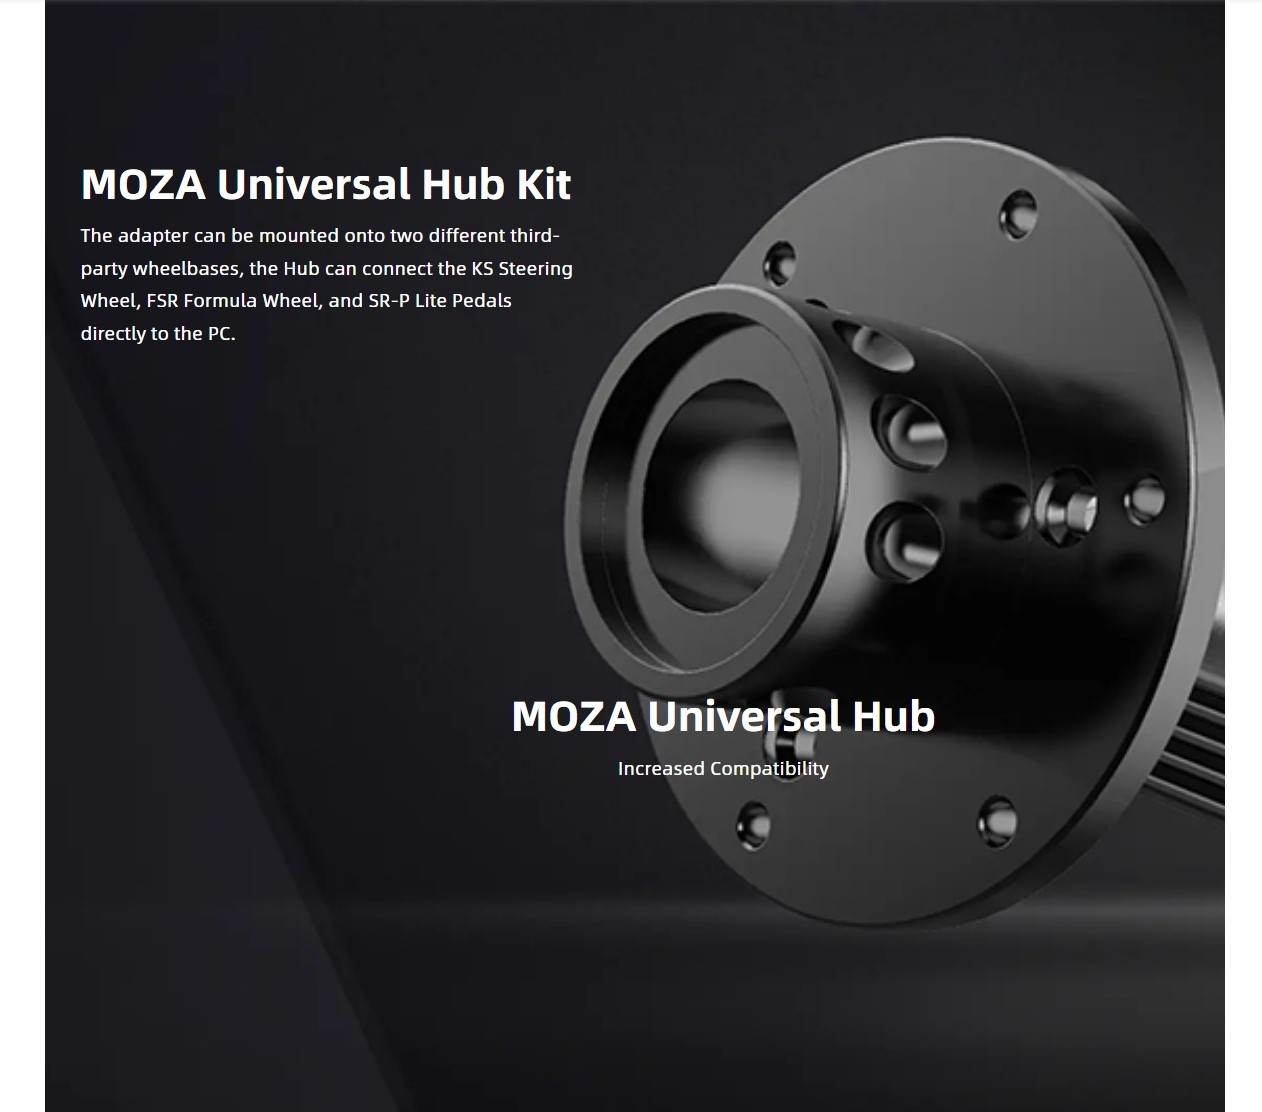 A large marketing image providing additional information about the product MOZA Universal Hub Kit - Additional alt info not provided